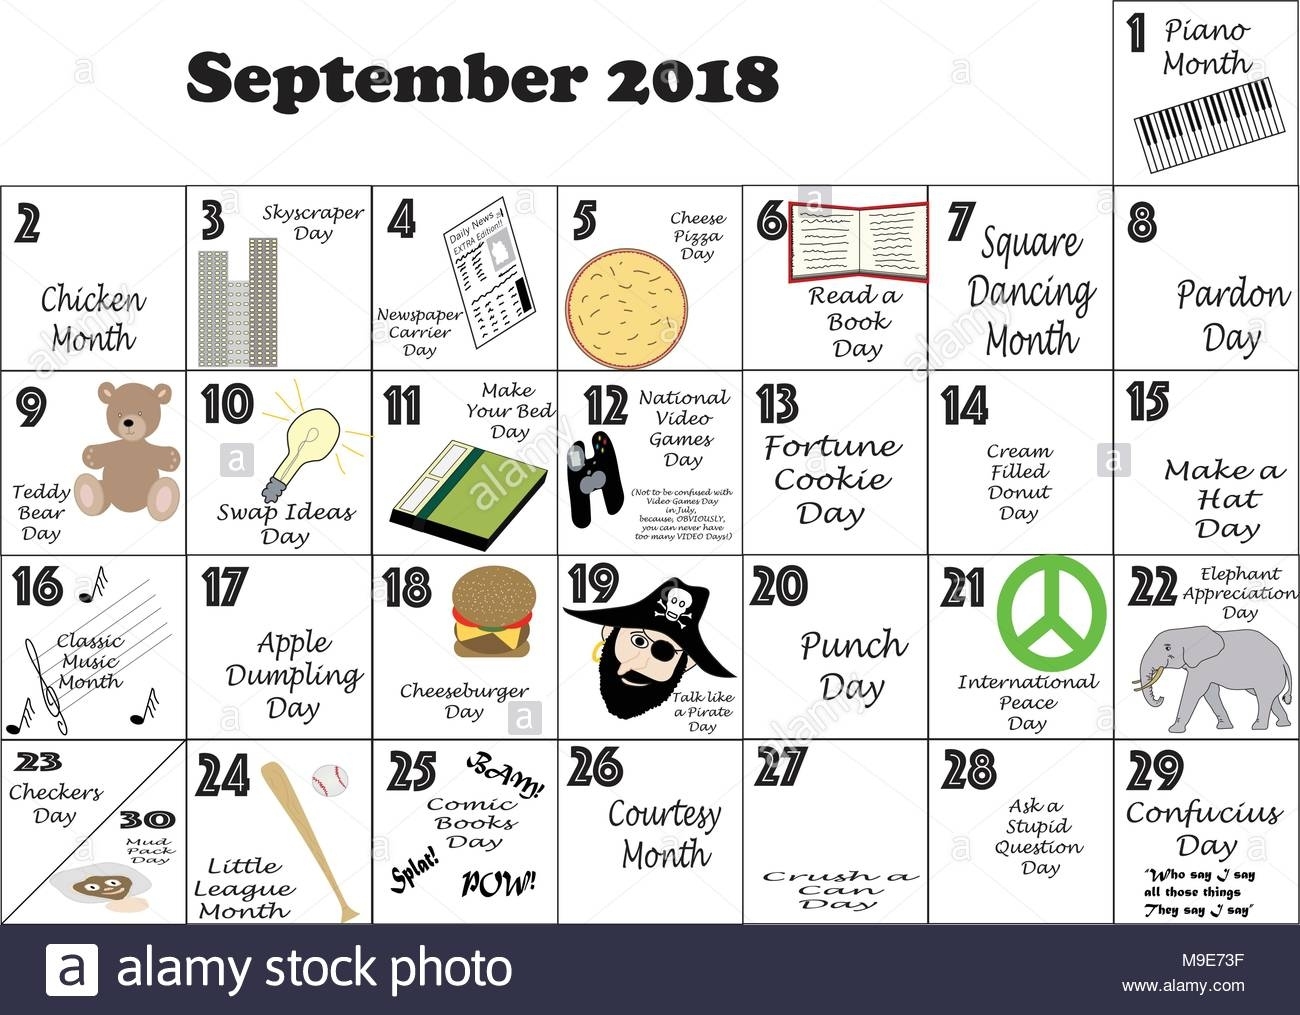 September 2018 Monthly Calendar Illustrated And Annotated With Daily Calendar Of Holidays And Celebrations